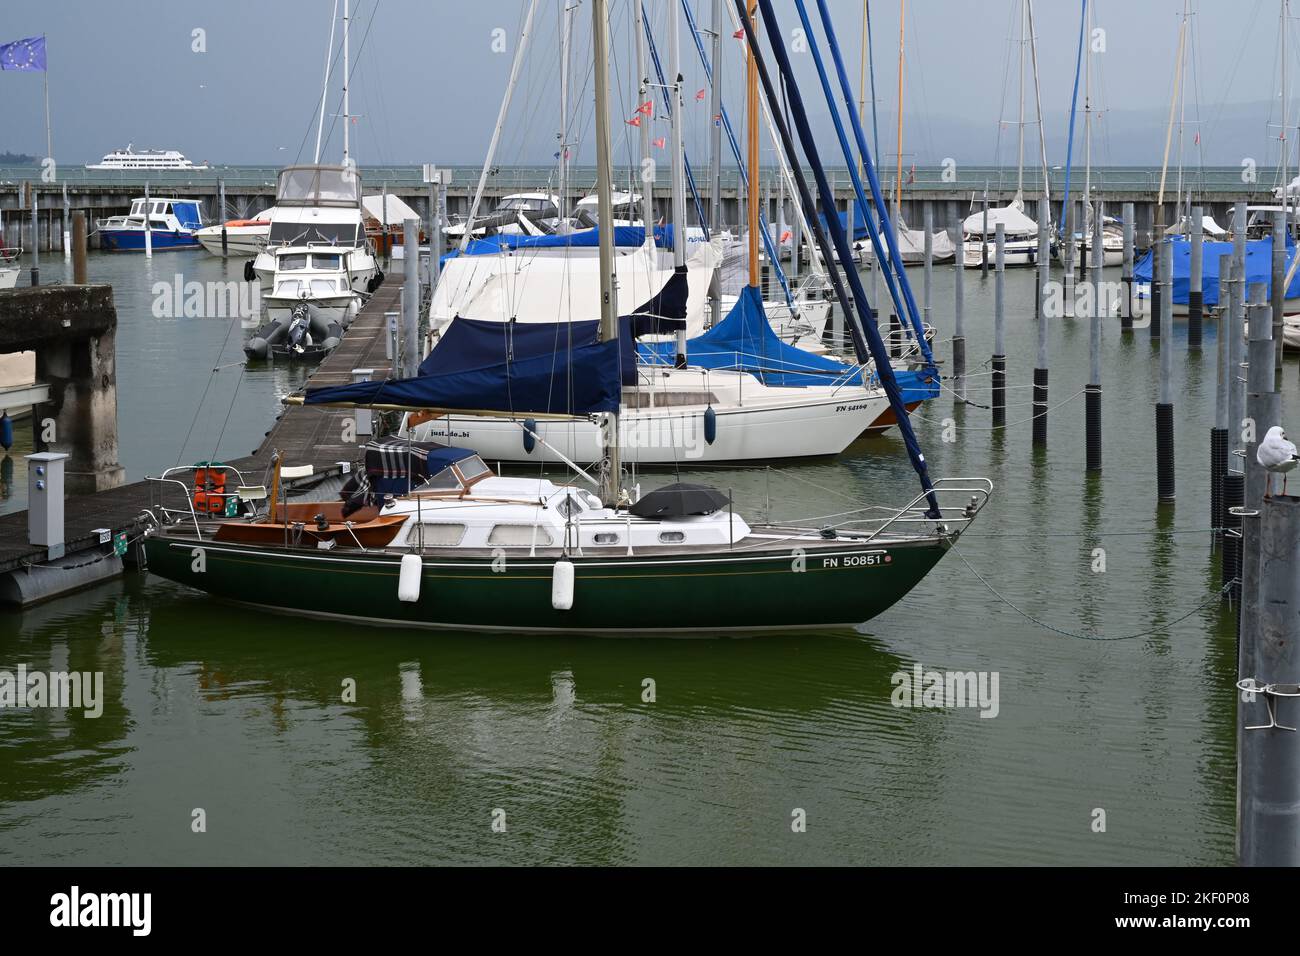 Sailing yachts arranged in rows in a marina partly covered for winter season and with lowered sails. Stock Photo